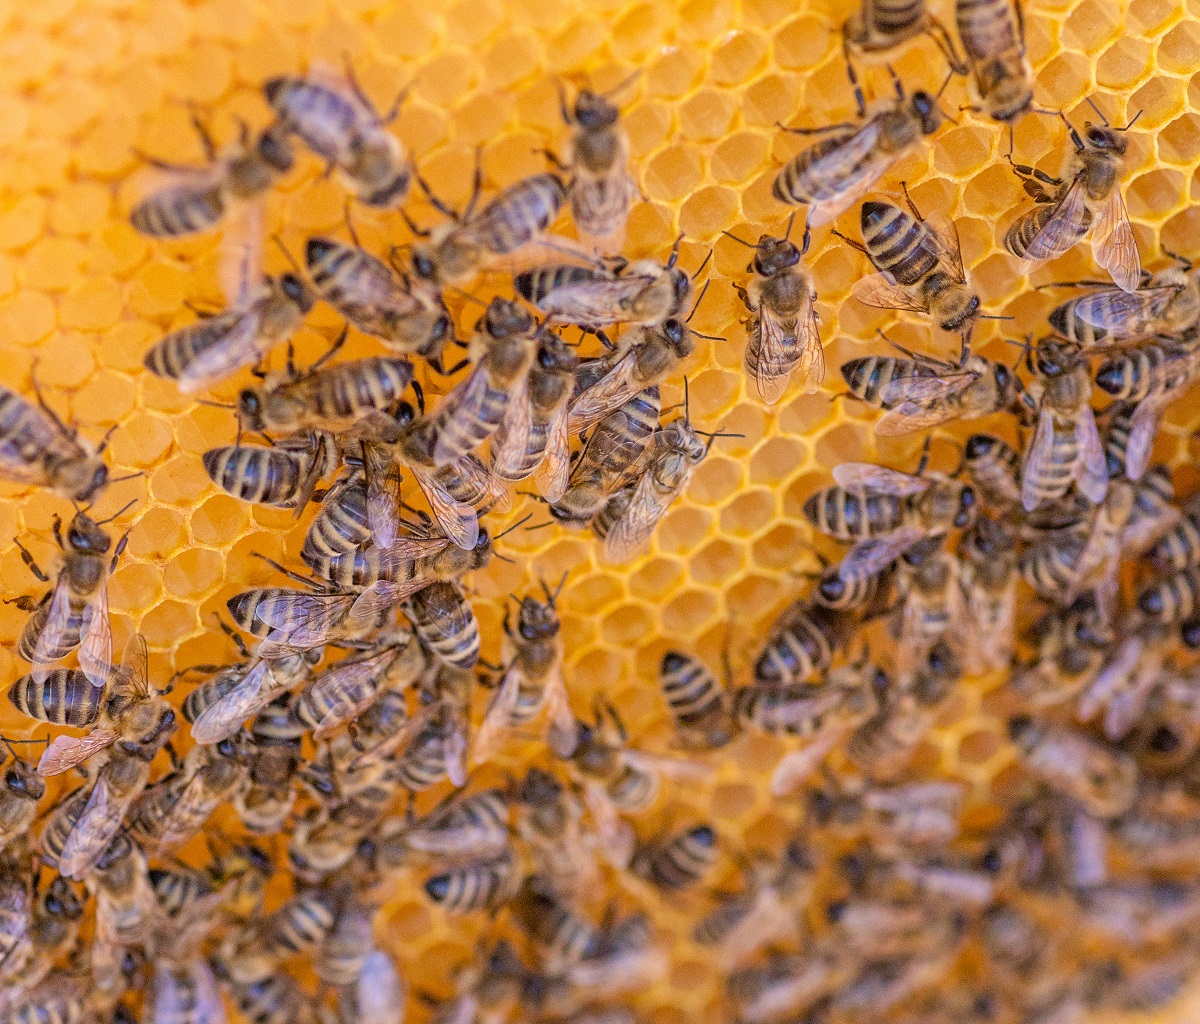 Call-Bee-and-Wasp-Removal-Experts-to-Safely-Remove-a-Beehive-Near-Your-Home